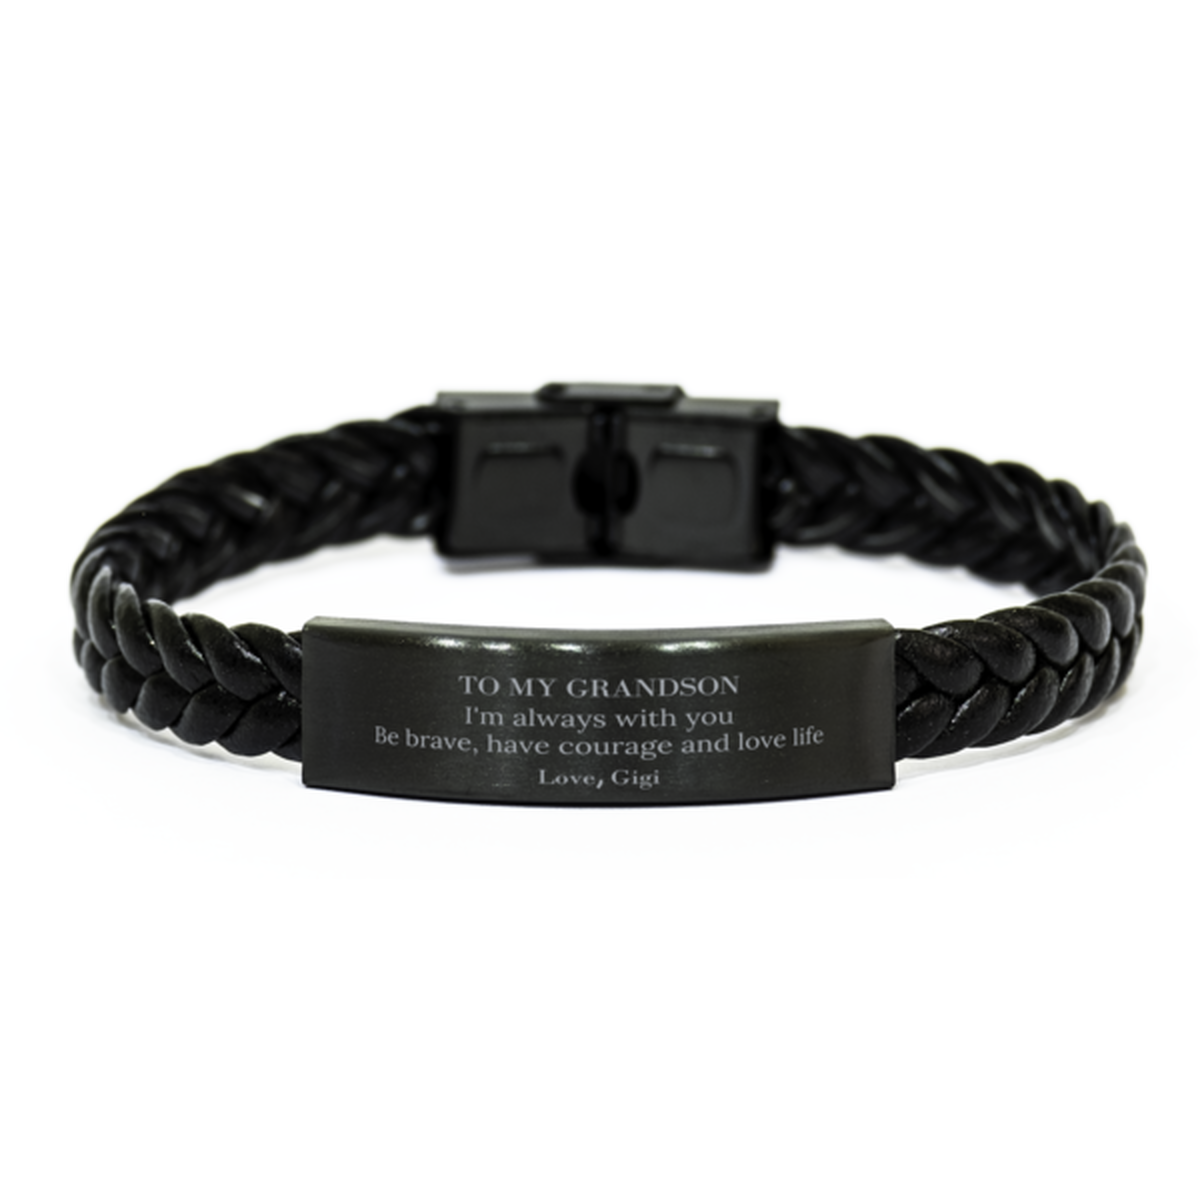 To My Grandson Gifts from Gigi, Unique Braided Leather Bracelet Inspirational Christmas Birthday Graduation Gifts for Grandson I'm always with you. Be brave, have courage and love life. Love, Gigi